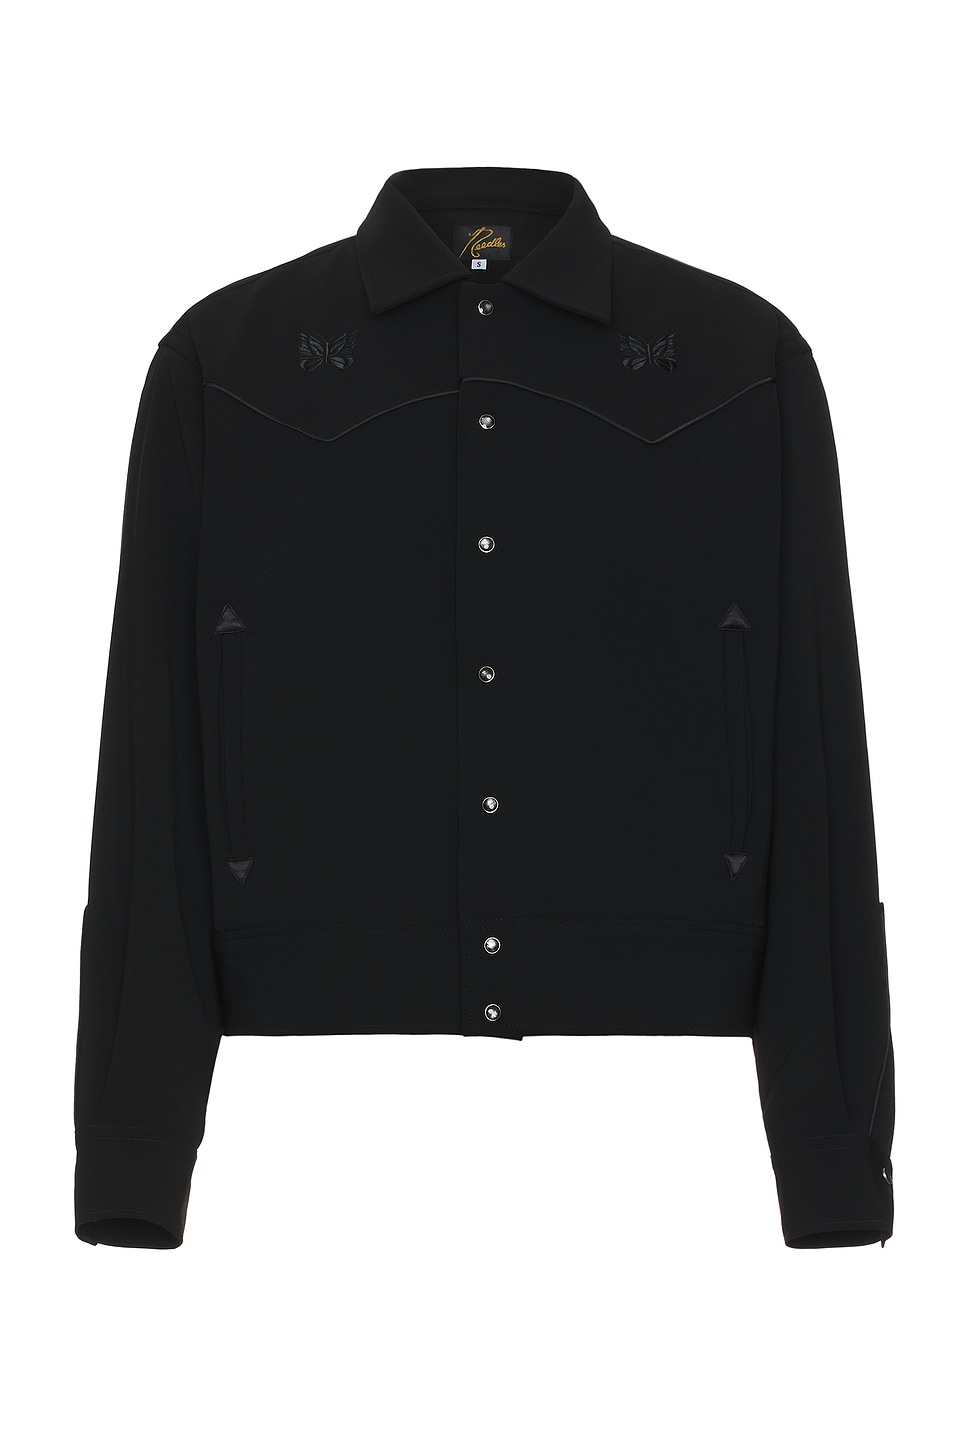 Image 1 of Needles Piping Cowboy Jacket Double Cloth In Black in Black